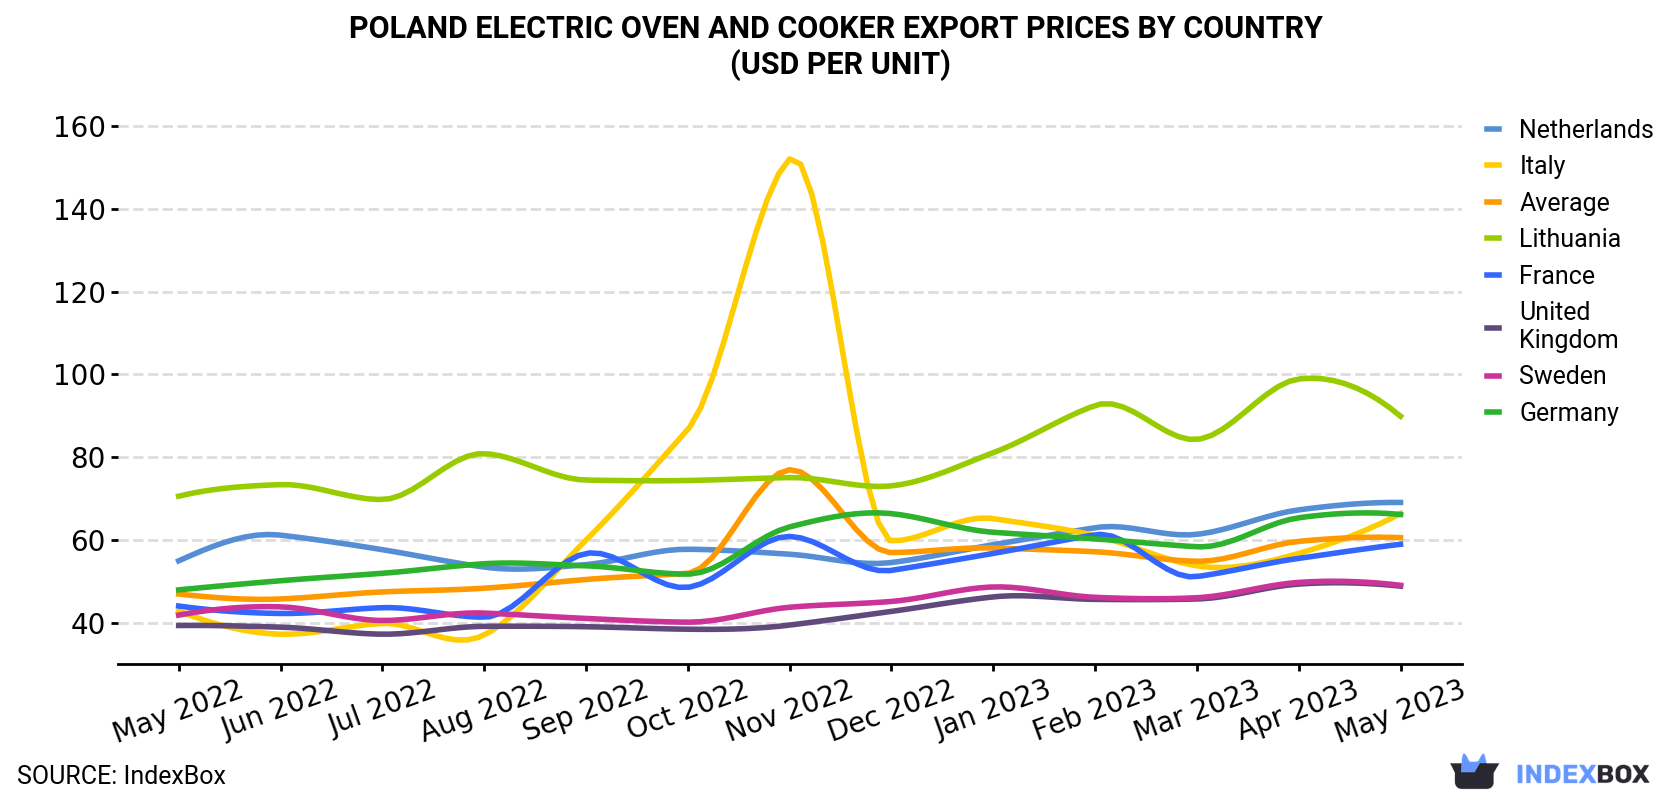 Poland Electric Oven And Cooker Export Prices By Country (USD Per Unit)